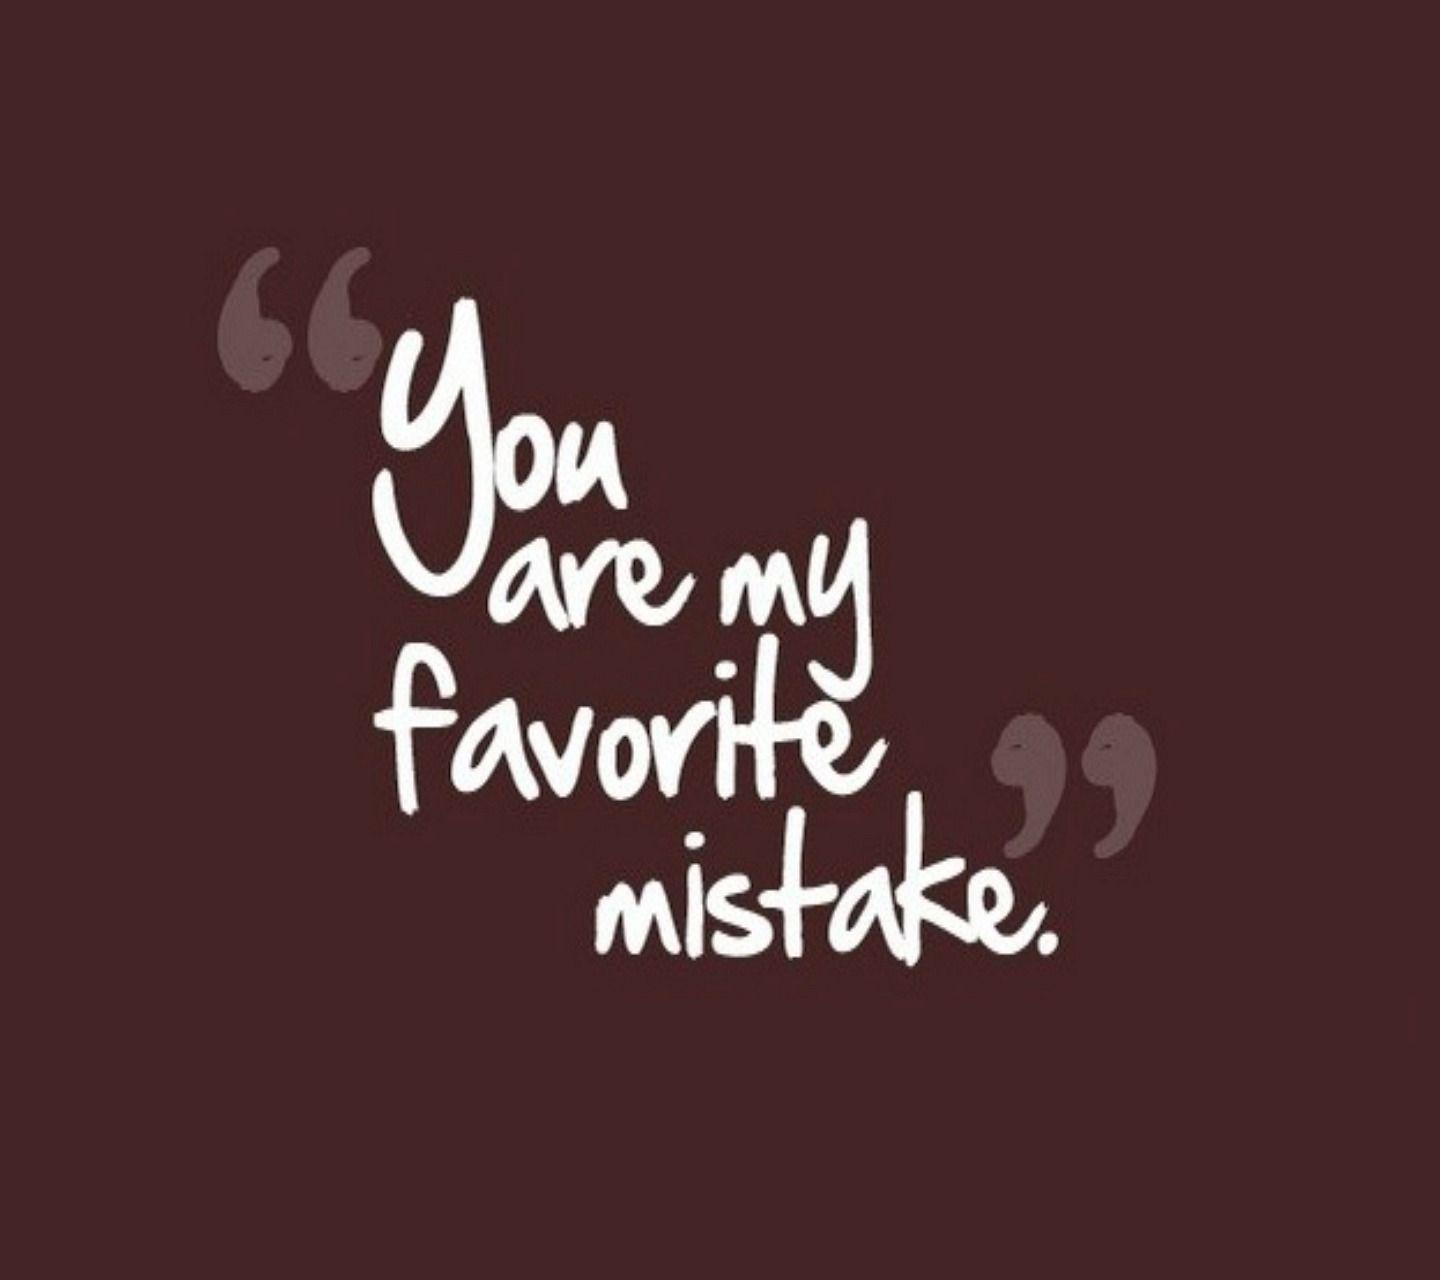 Quotes And Inspirational Wallpaper: My Mistake